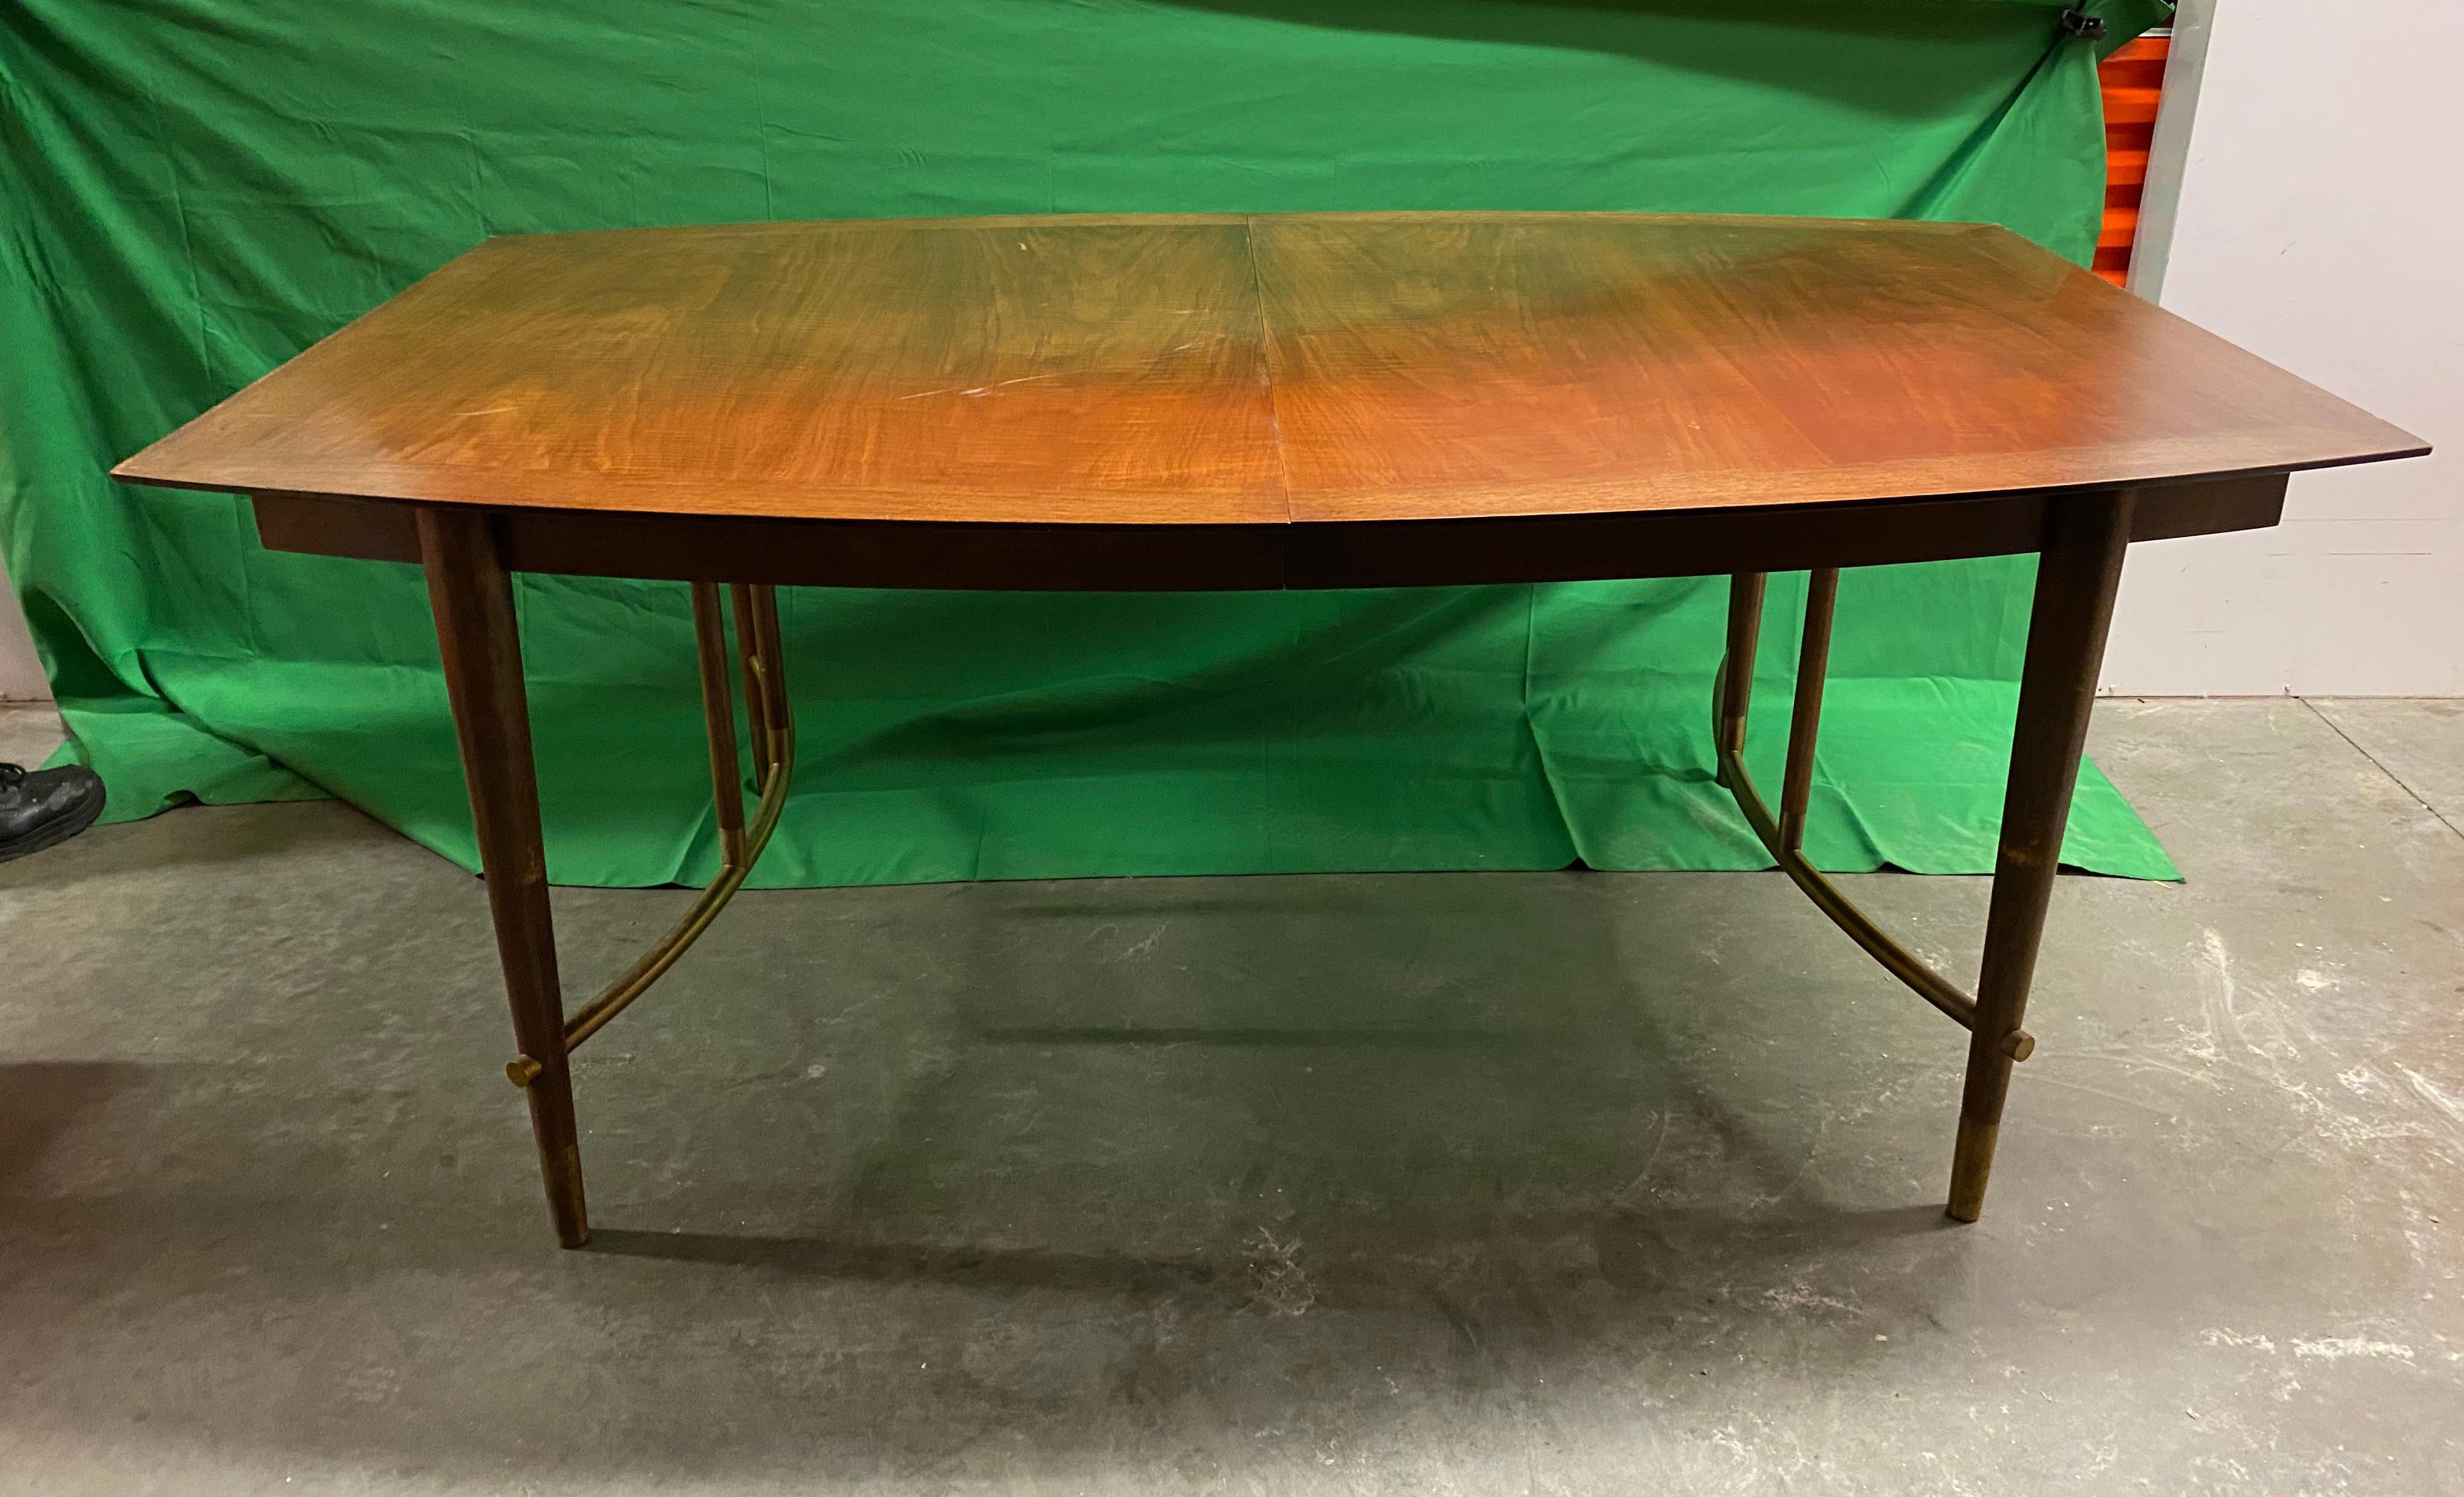 Bert England Mid-Century Modern Walnut and Brass Dining Table with Curved Shape For Sale 1